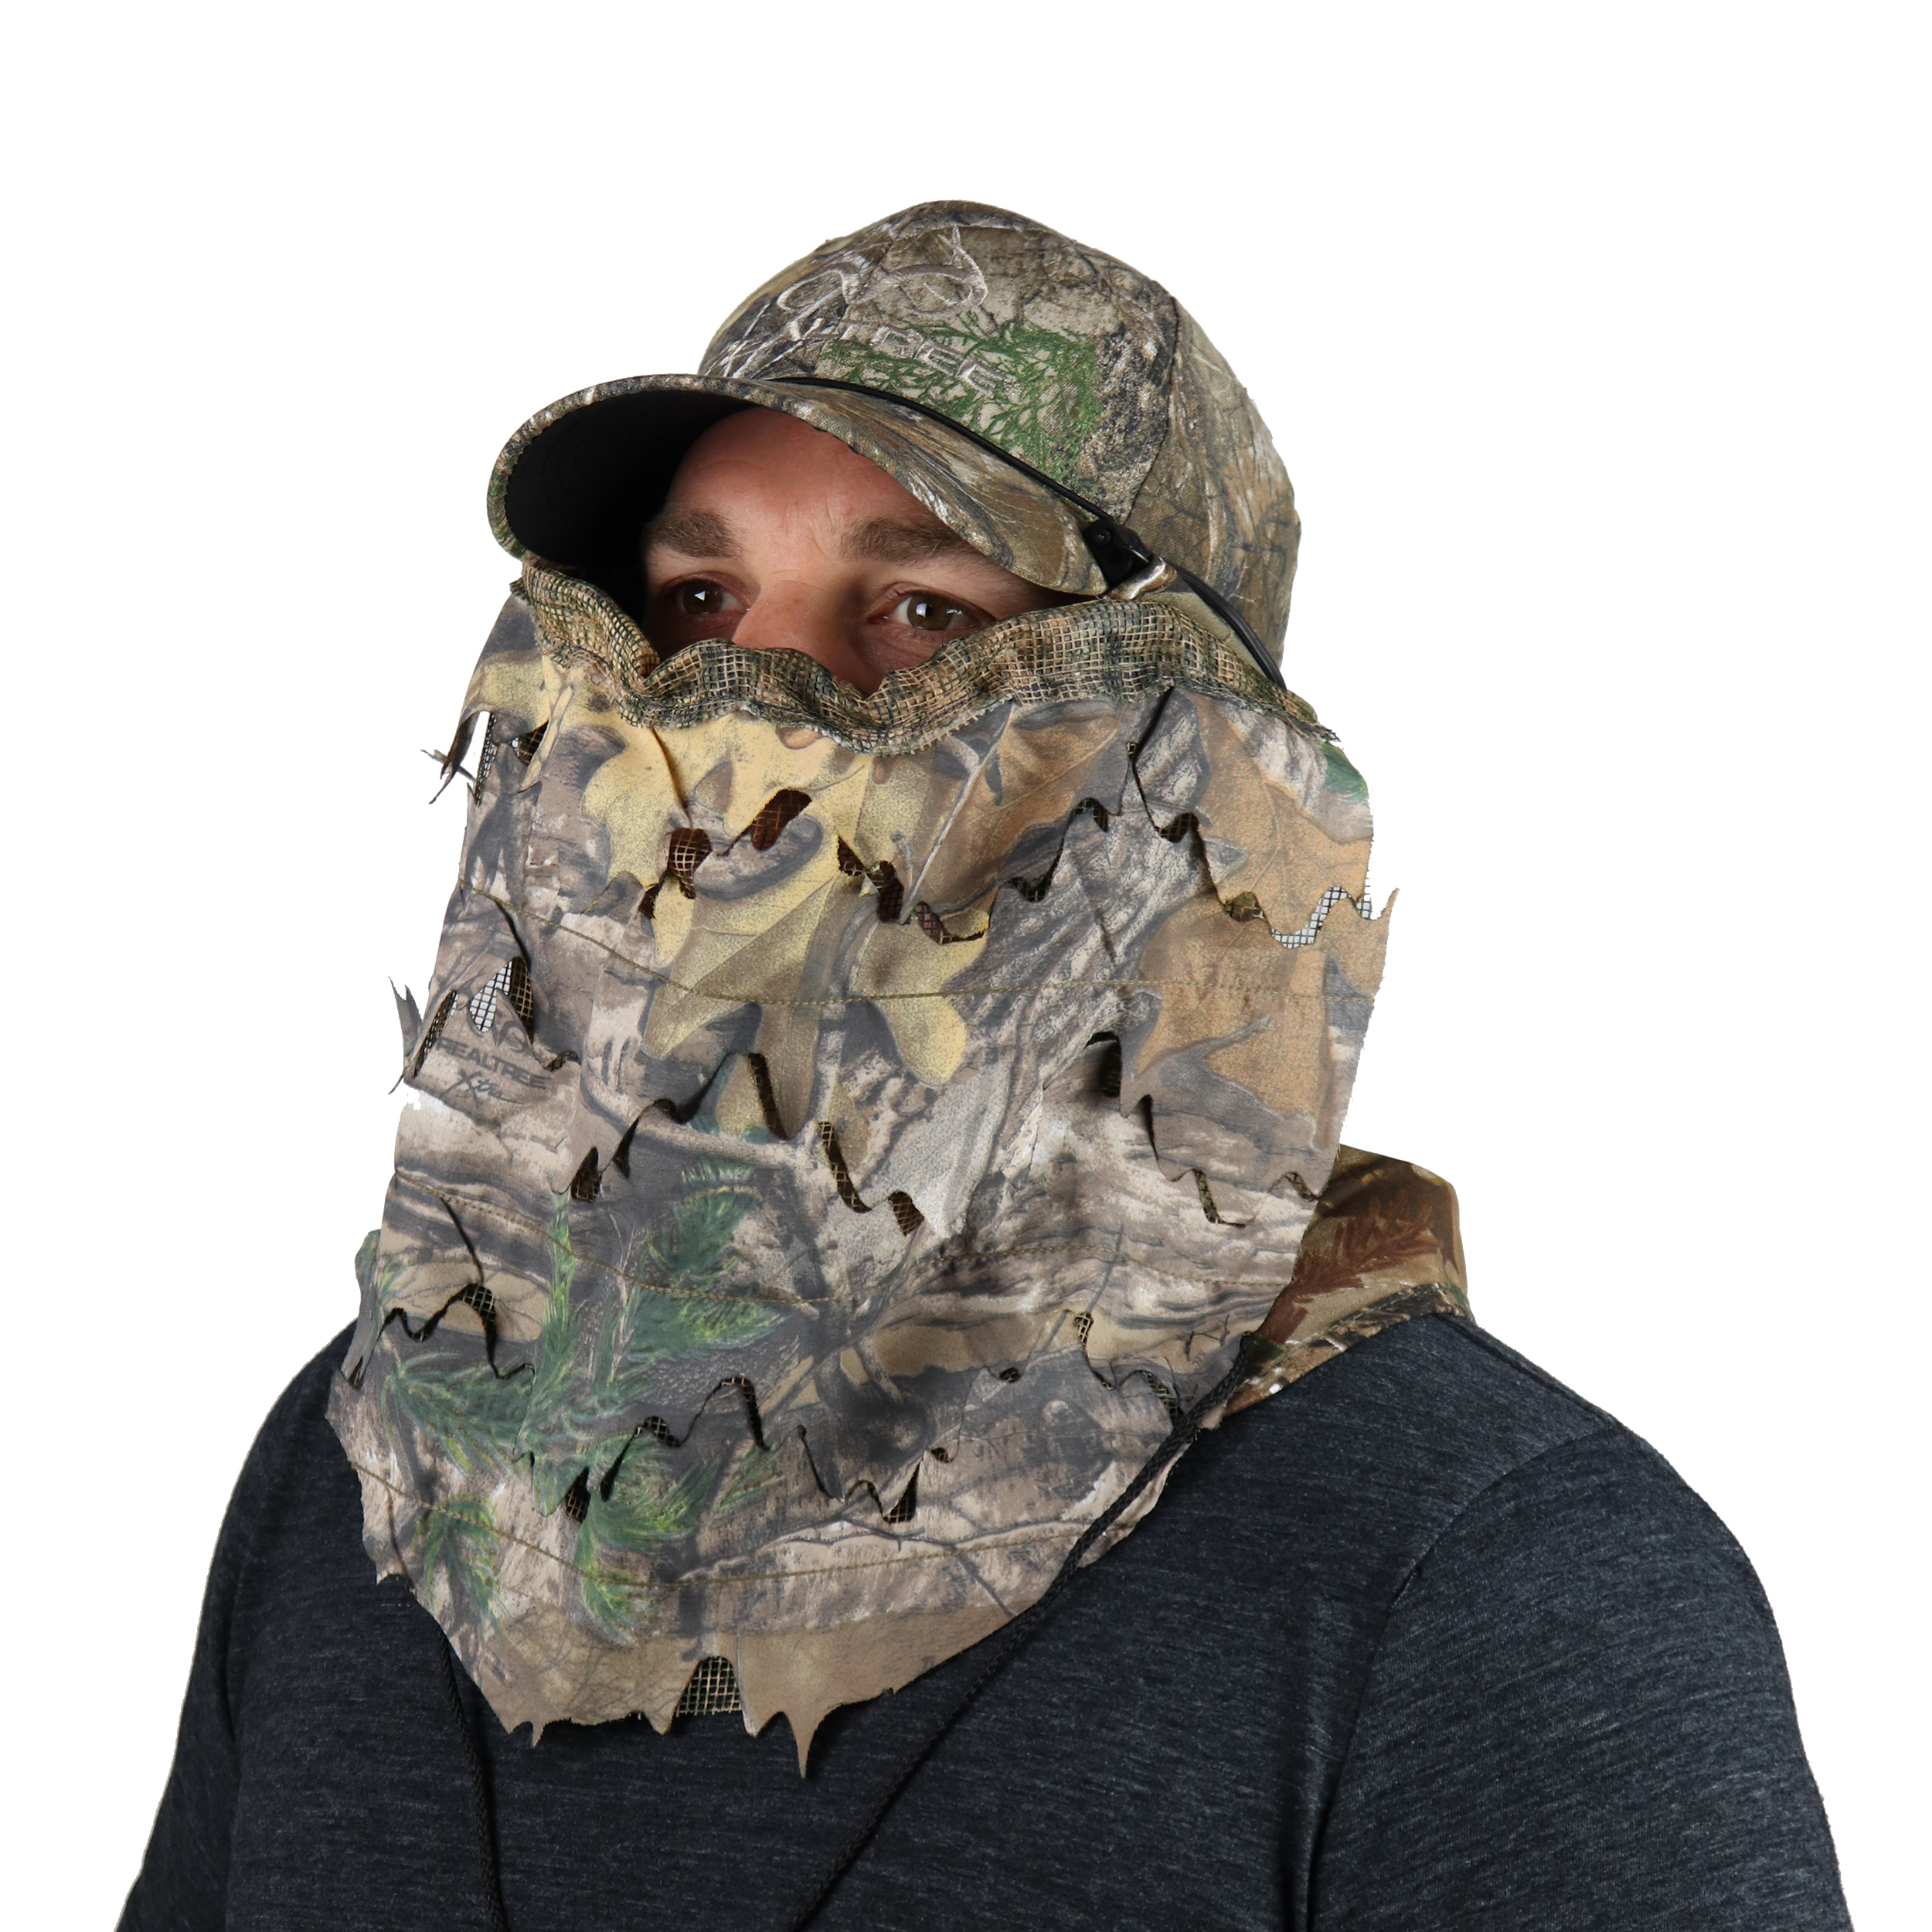 BunkerHead Realtree Xtra Leafy and Cotton System 854748004376 - Picture 1 of 1